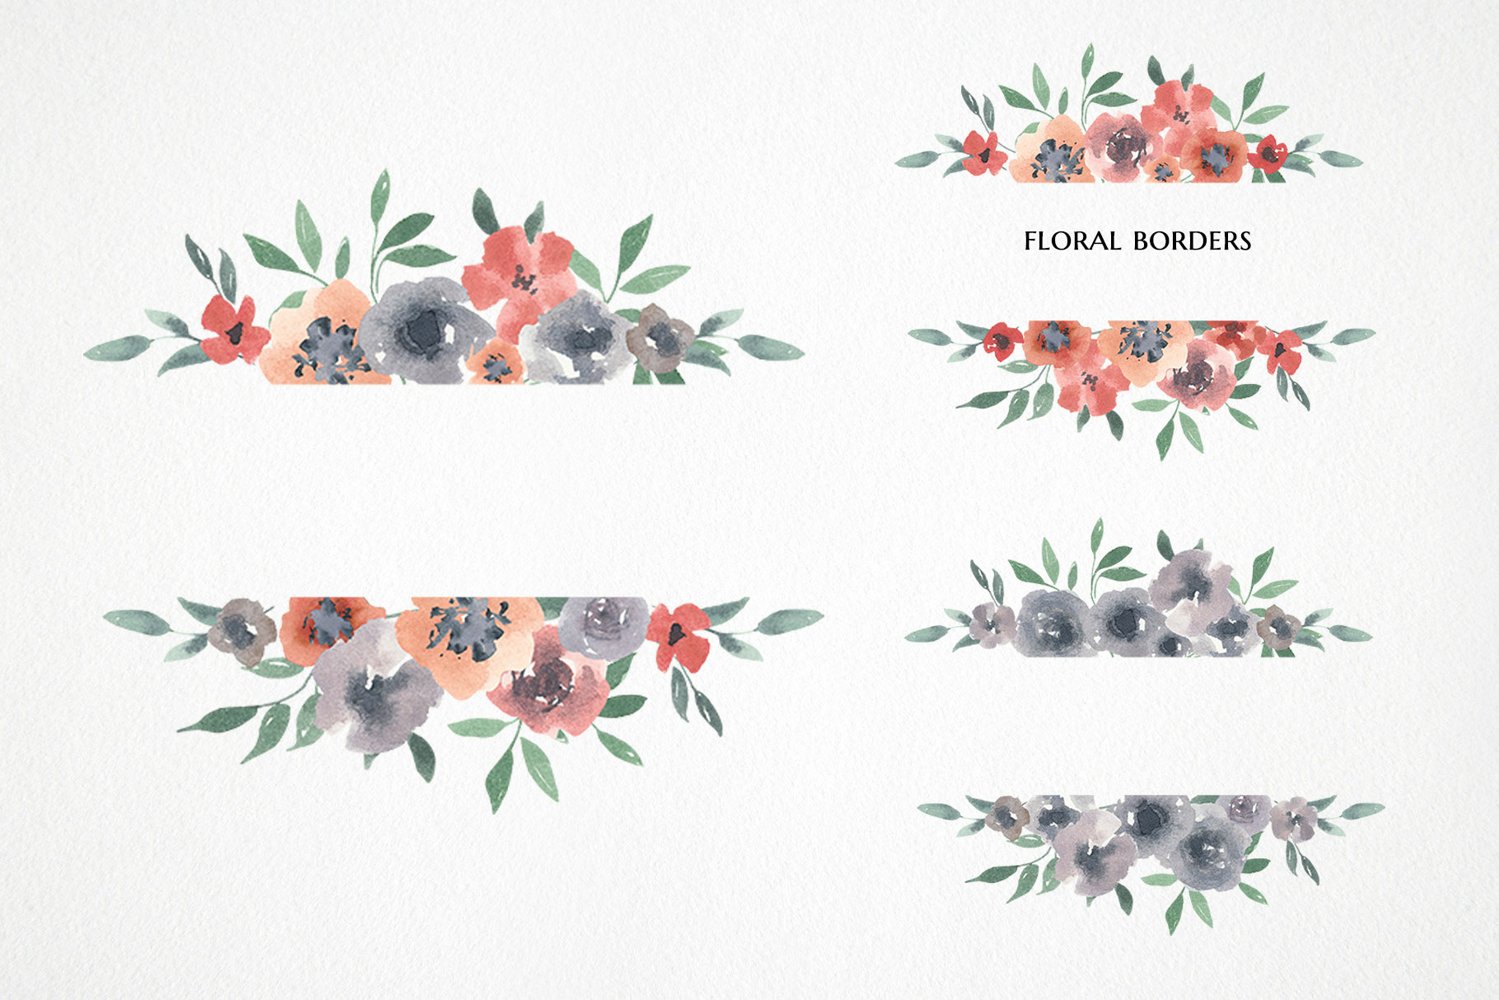 This set includes floral borders.